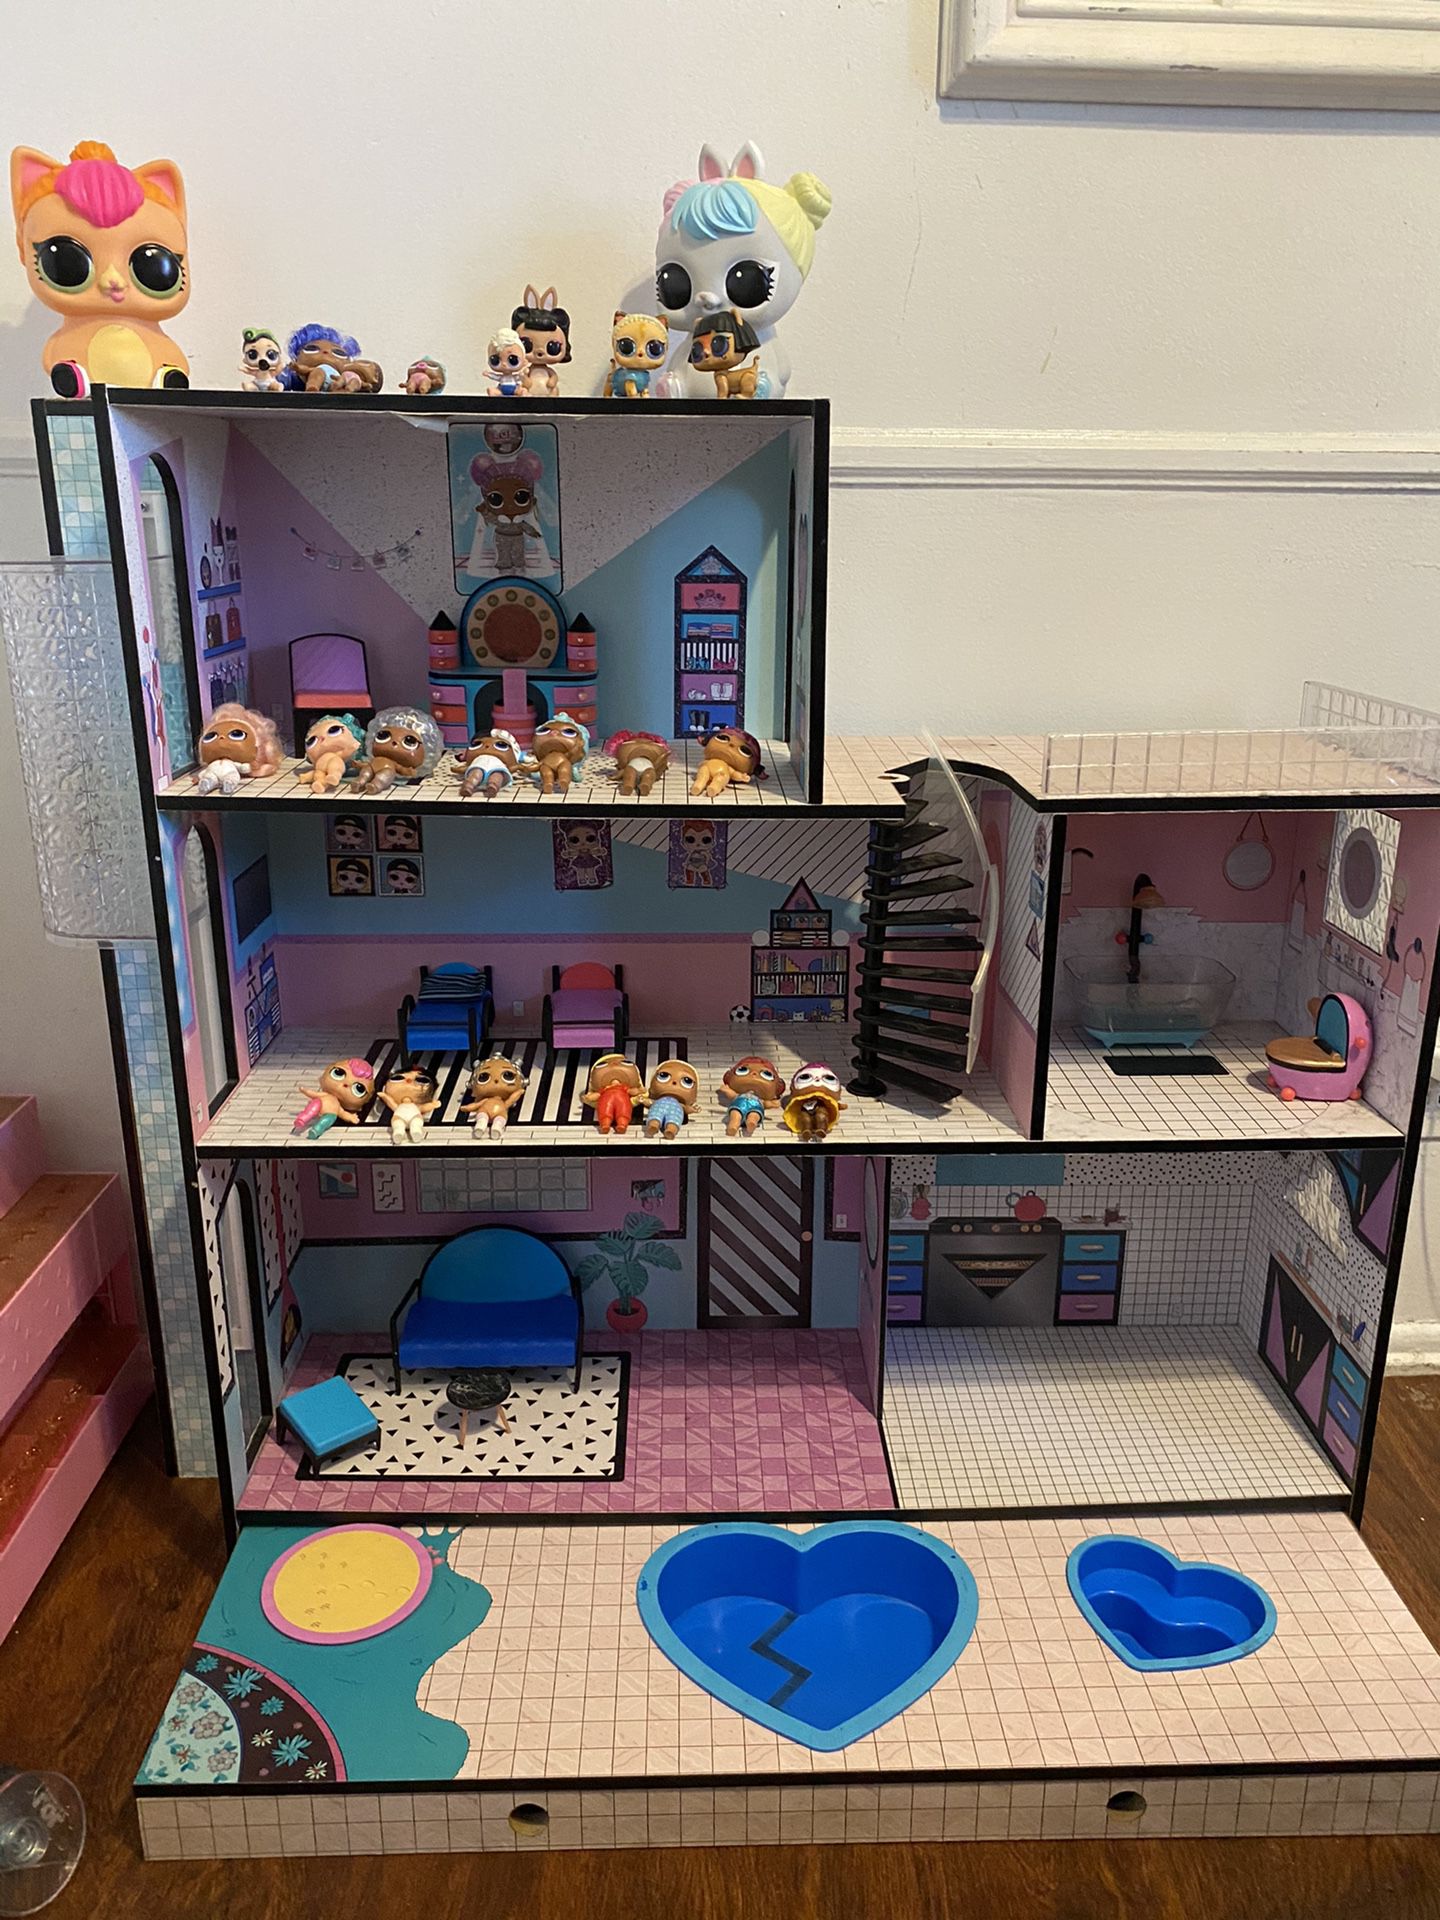 LOL Surprise Doll House with dolls and accessories